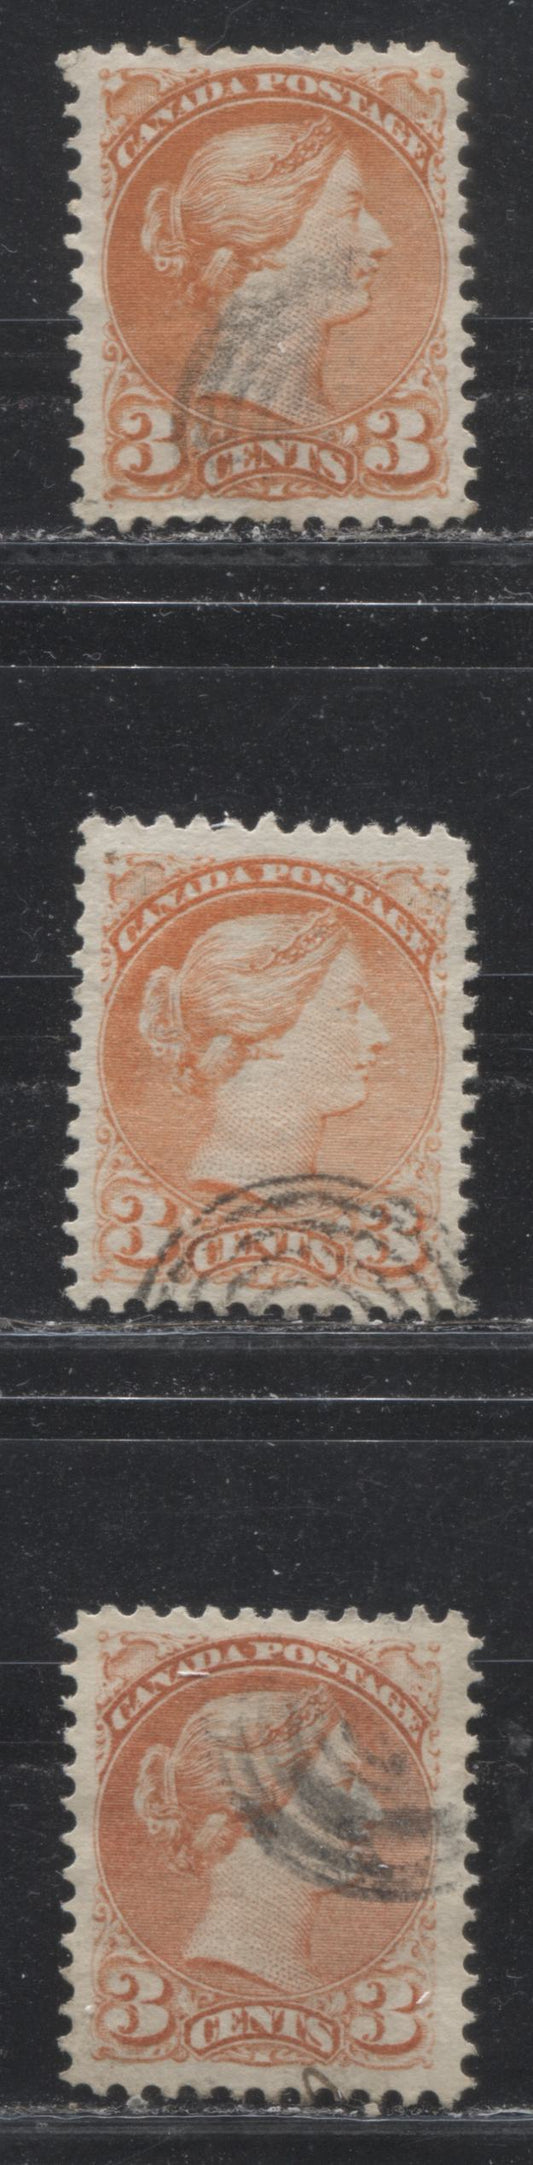 Lot 163 Canada #37e,iii 3c Red Orange, Bright Red Orange & Red Queen Victoria, 1870-1897 Small Queen Issue, Three Very Fine Used Singles On Stout & Soft Horizontal Wove Papers, Perfs 11.6 x 12.1, 11.75 x 12 & 11.75 x 11.9